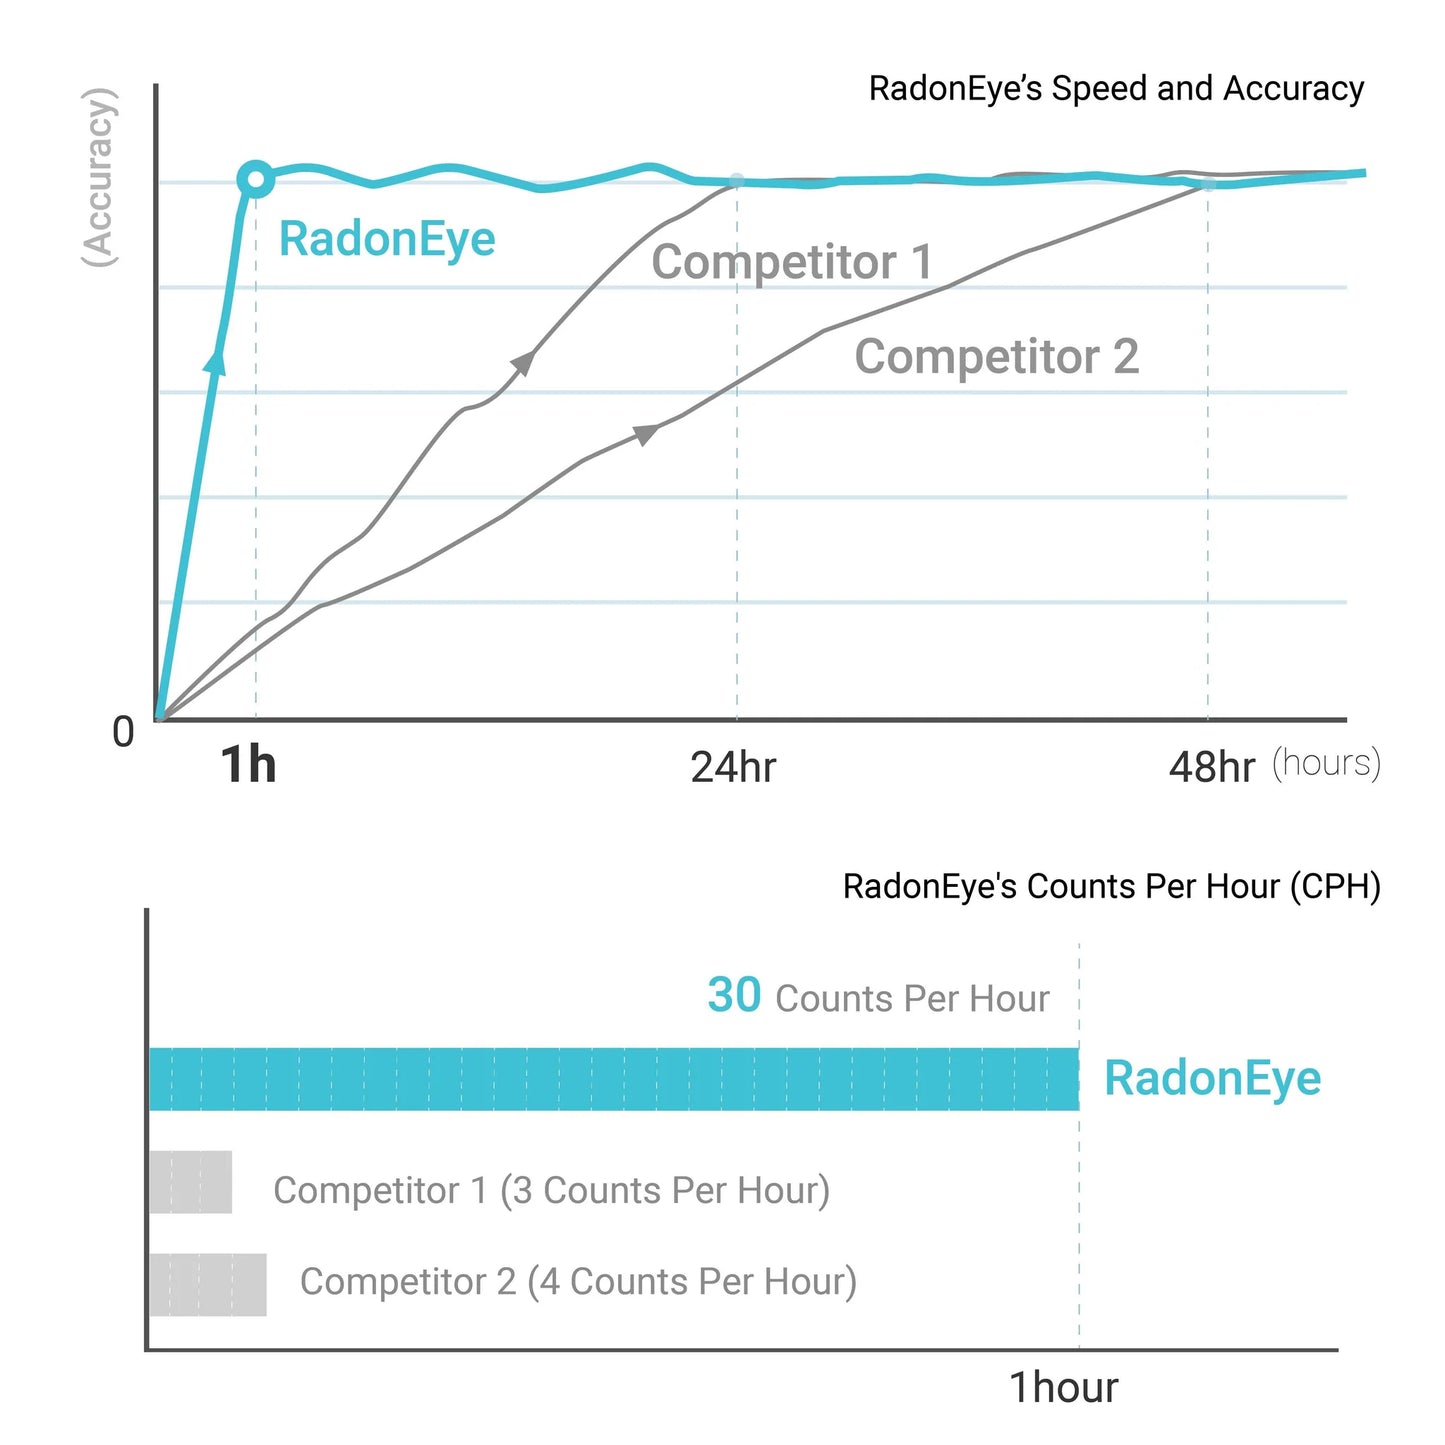 ntroducing the RadonEye RD200 - the most accurate radon detection device on the market. Protect your family's health with advanced technology that accurately detects radon levels in just 24-48 hours. Easily monitor your home or business via the smartphone app, which alerts you if radon levels exceed safety limits. Get the reliable, cost-effective RadonEye RD200 and breathe easy with a radon-reduced home.